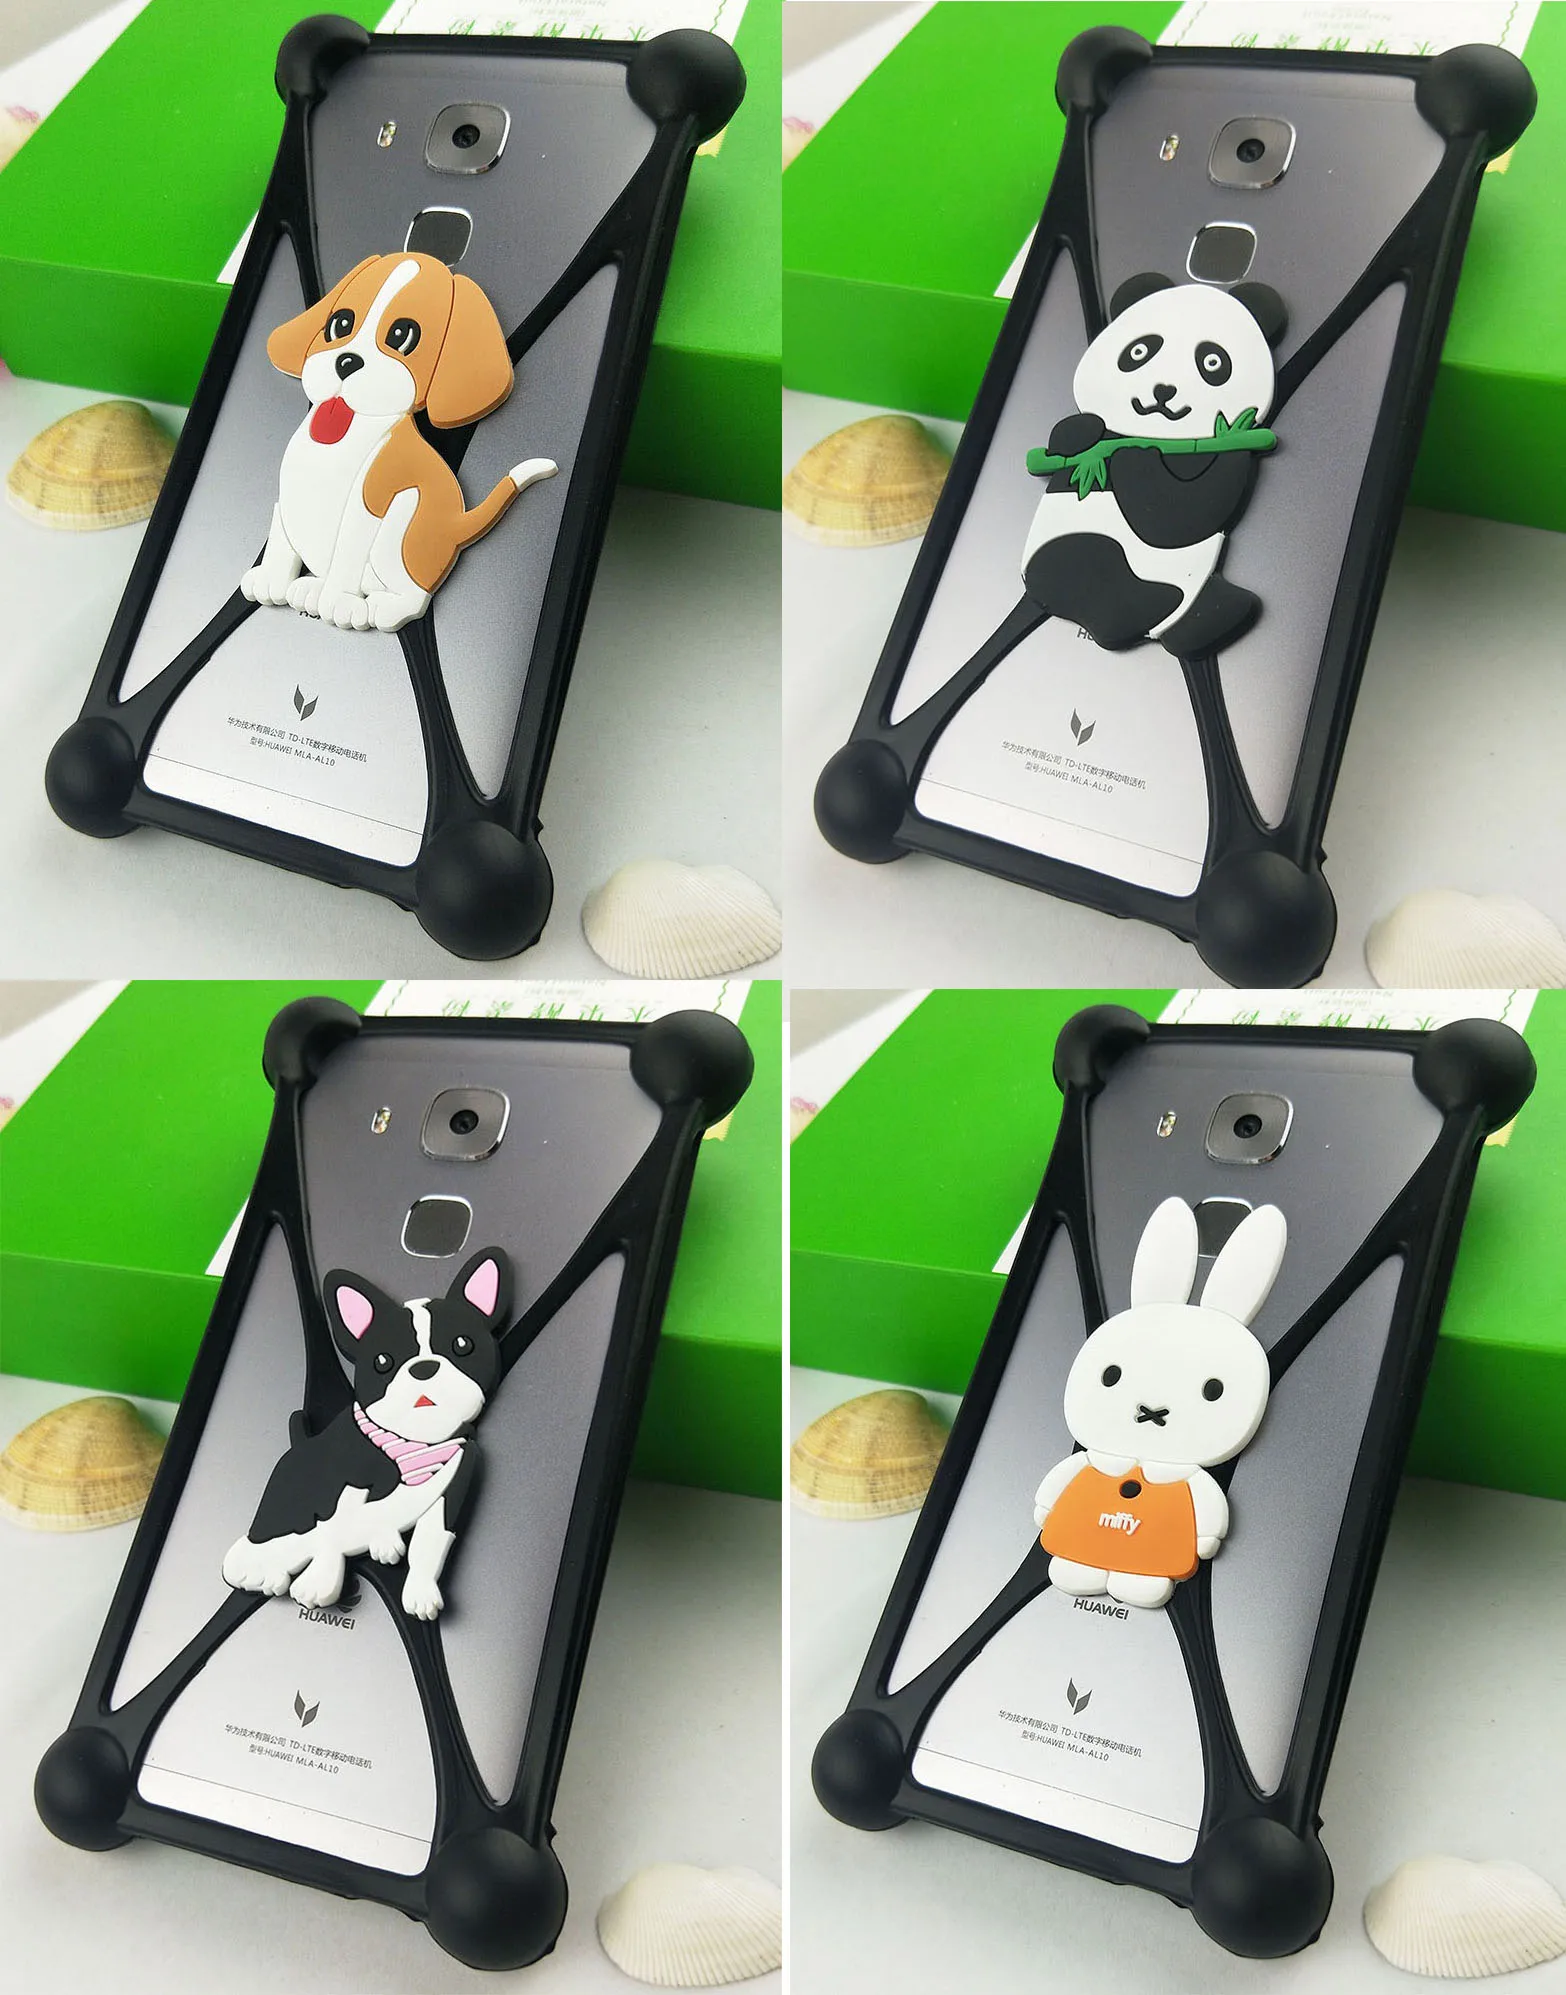 

Luxury Cartoon Phone Case Cover For TP-Link Neffos C7 Lite C5 PLUS P1 X9 C9 C9A C7A C5 C5A C5S N1 Y5S X1 Lite